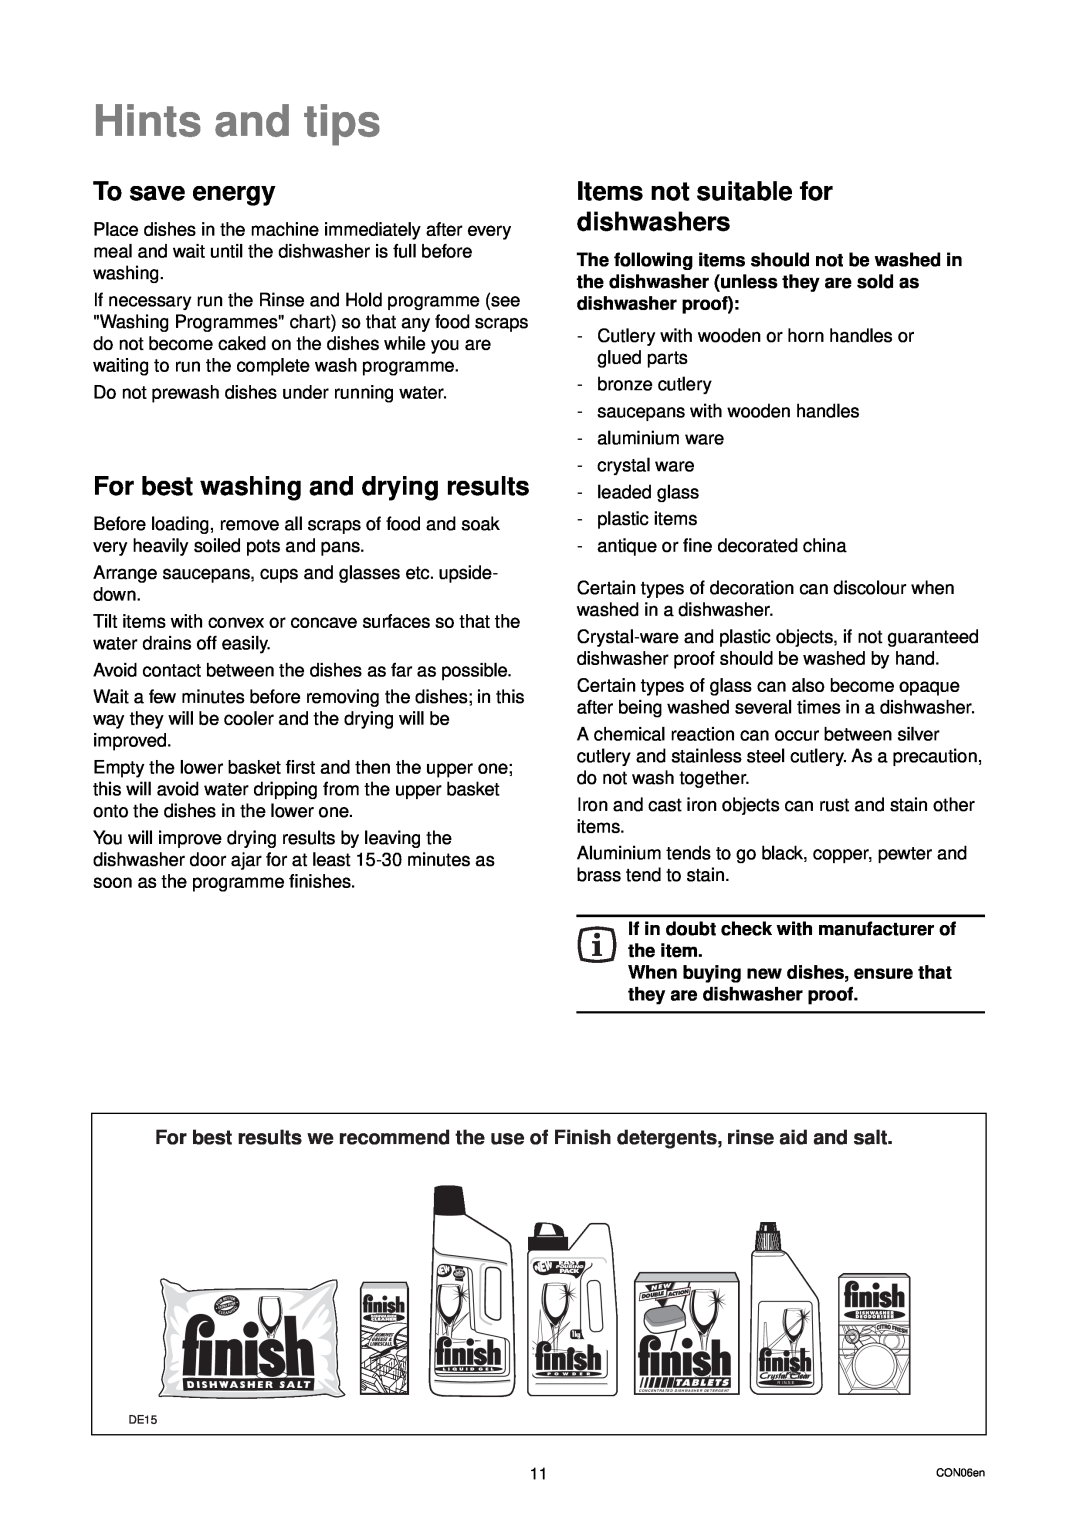 Electrolux DW 80 Hints and tips, To save energy, For best washing and drying results, Items not suitable for dishwashers 